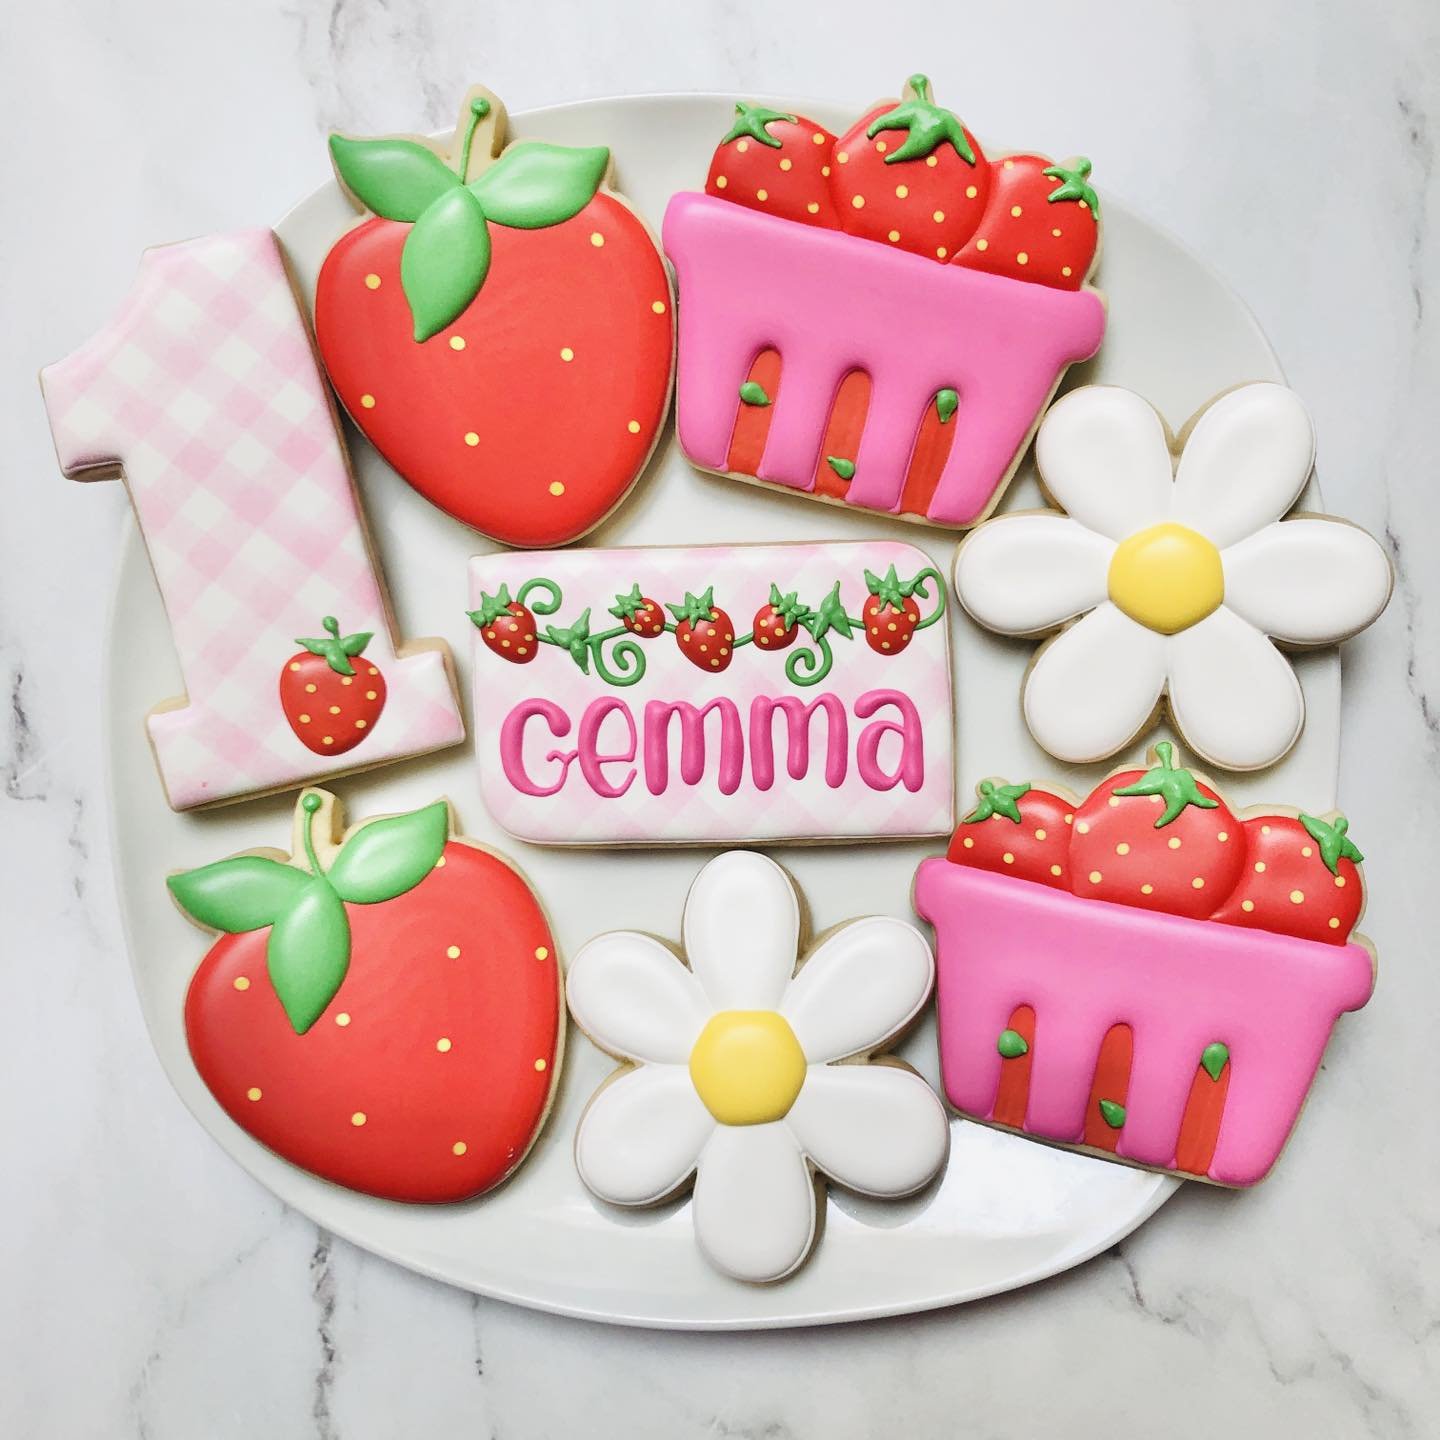 Strawberry-themed cookies for a first birthday celebration! 🩷🍓
.
.
.
.
. 
#thisisone #firstbirthday #strawberrycookies #strawberry #happybirthday #happybirthdaycookies #birthdaycookies #birthdaytreats #birthdaypartyfavors #partyfavors #momsofinstag